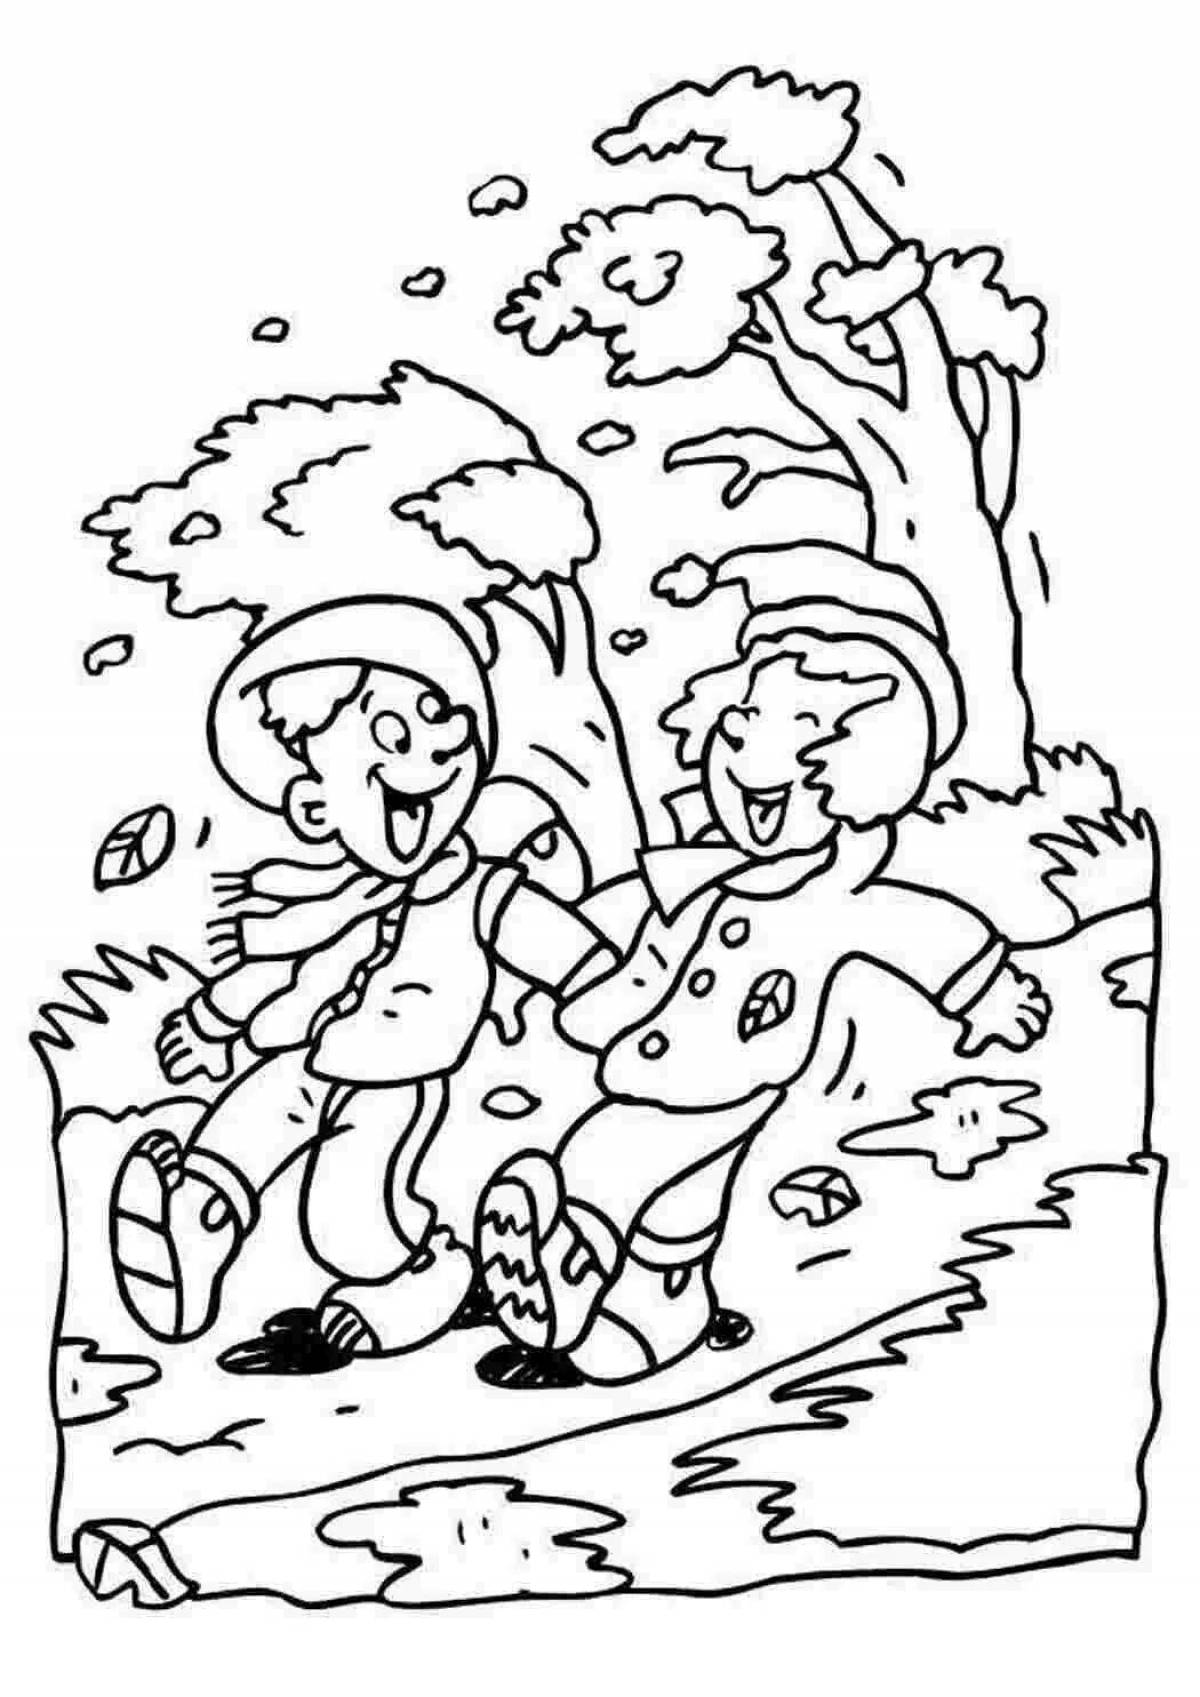 Shining wind coloring page